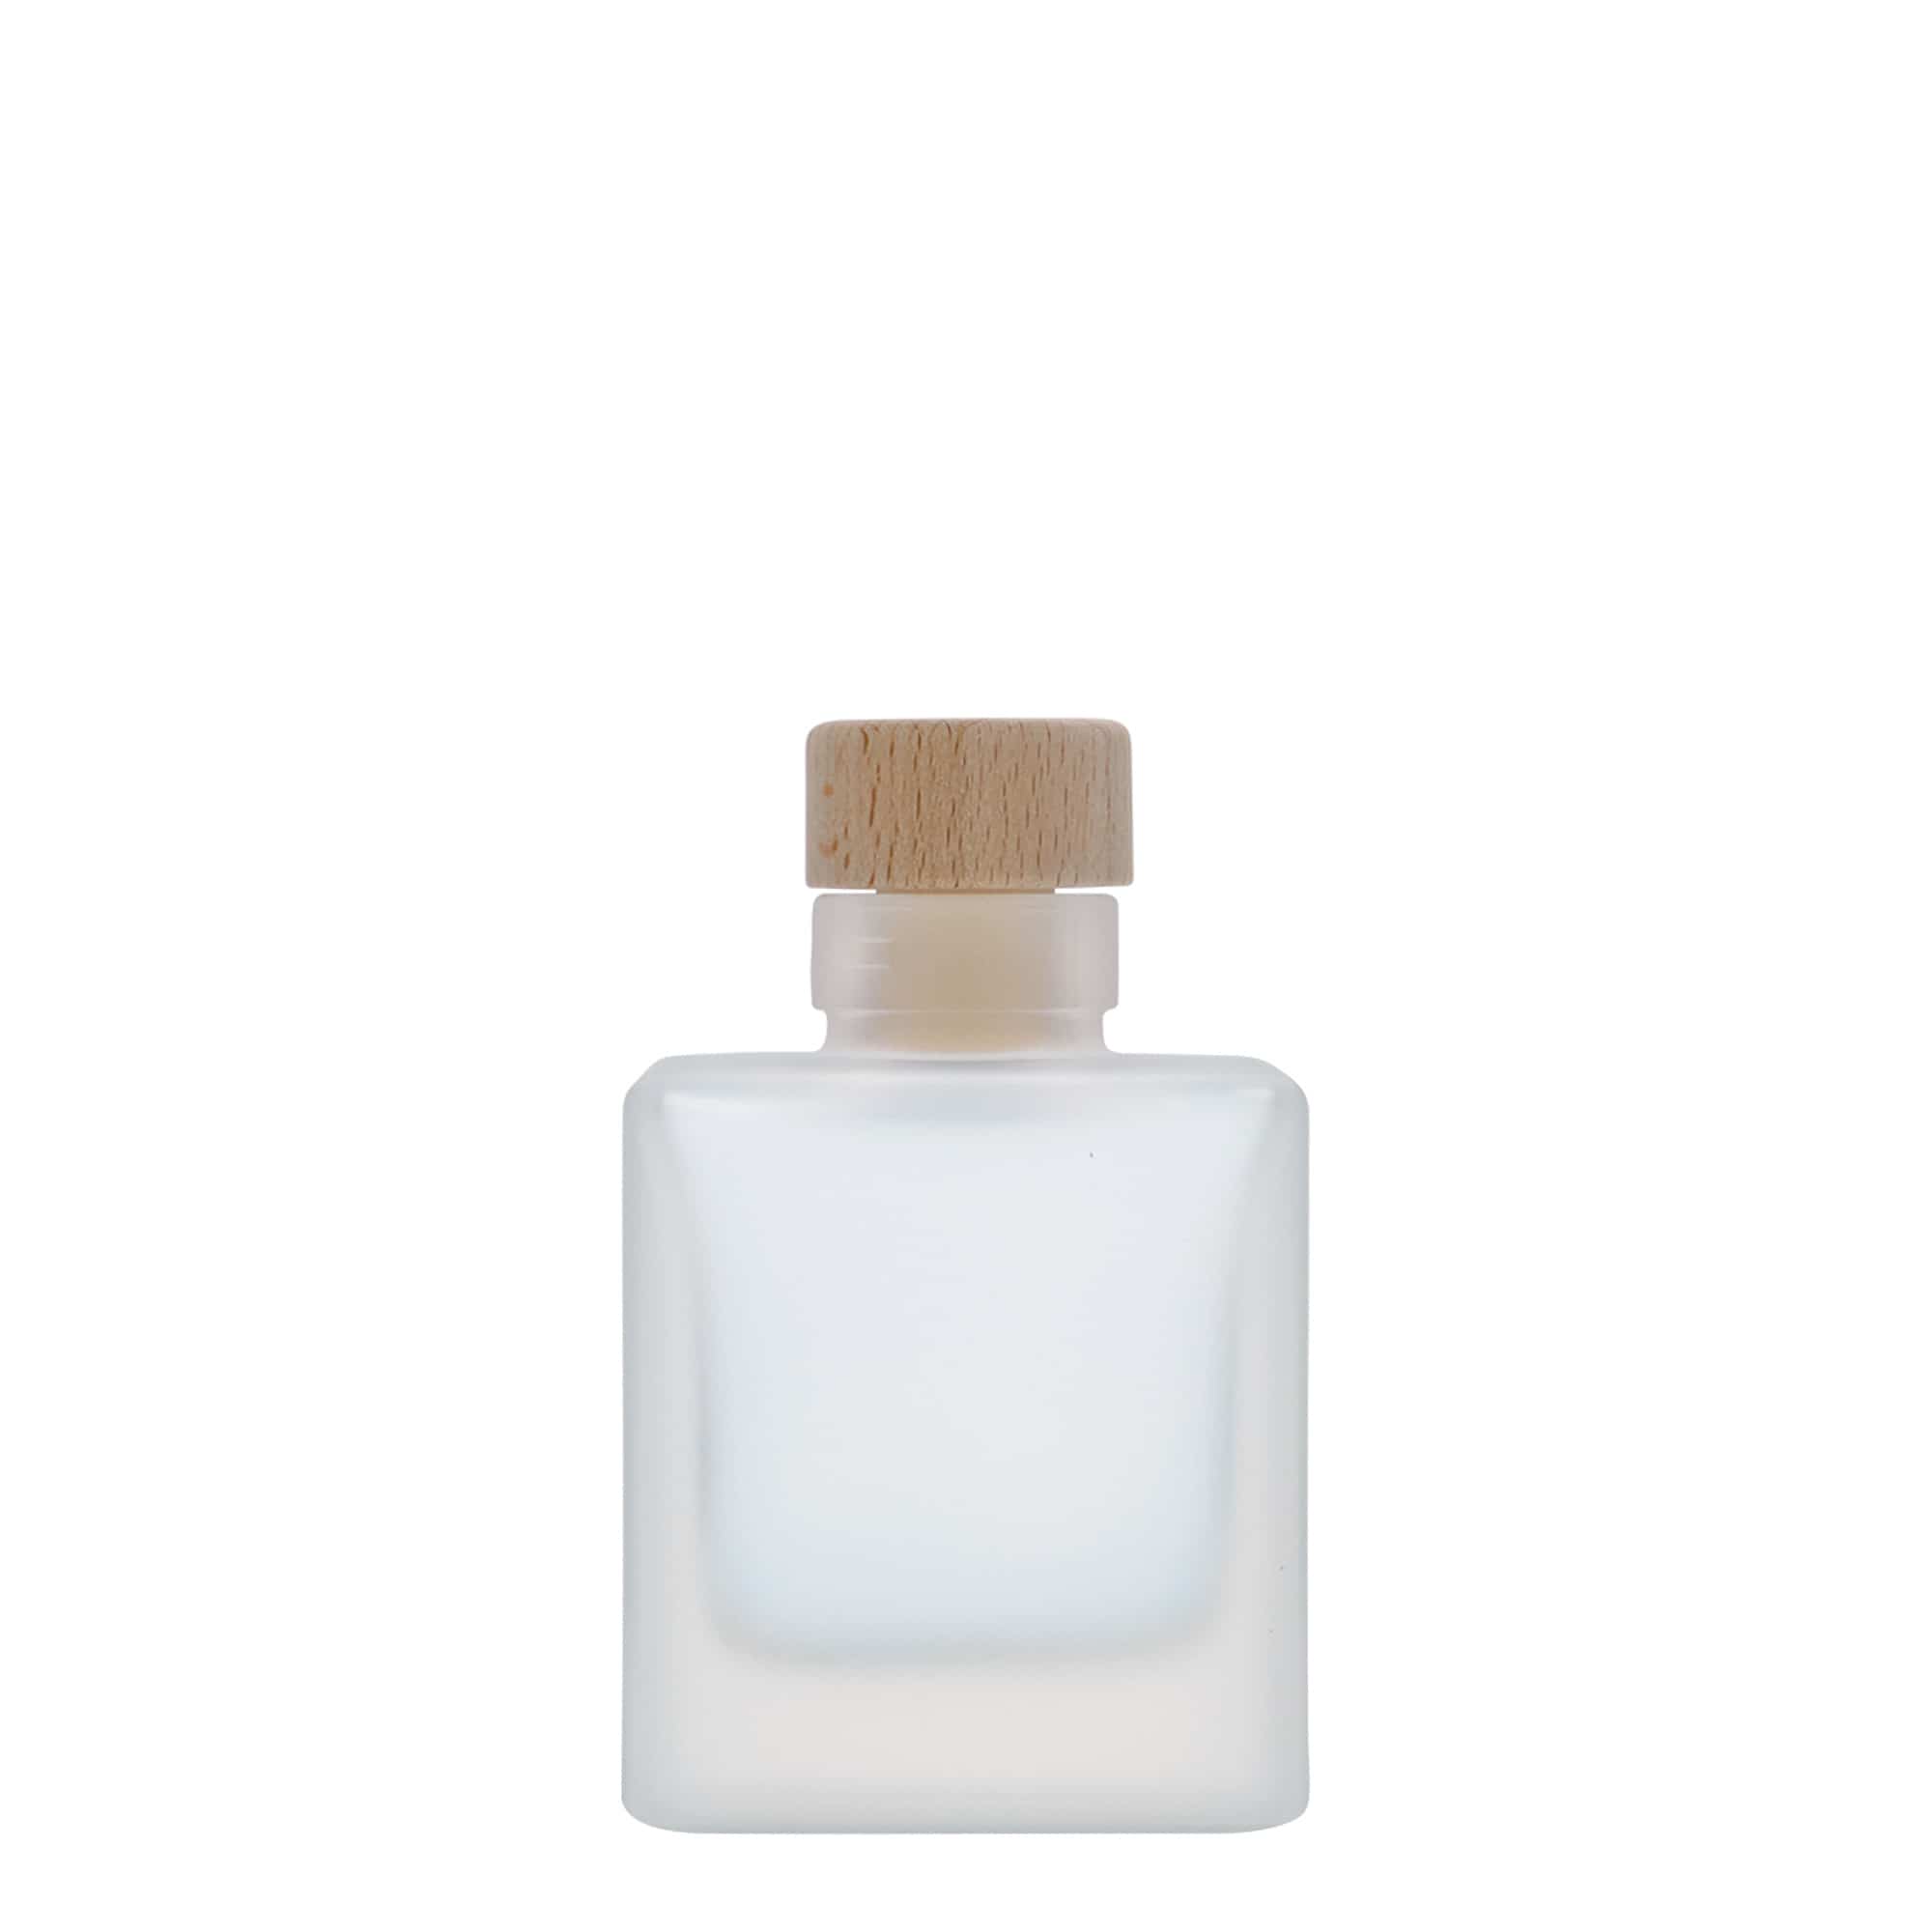 100 ml glass bottle 'Cube', square, frosted, closure: cork